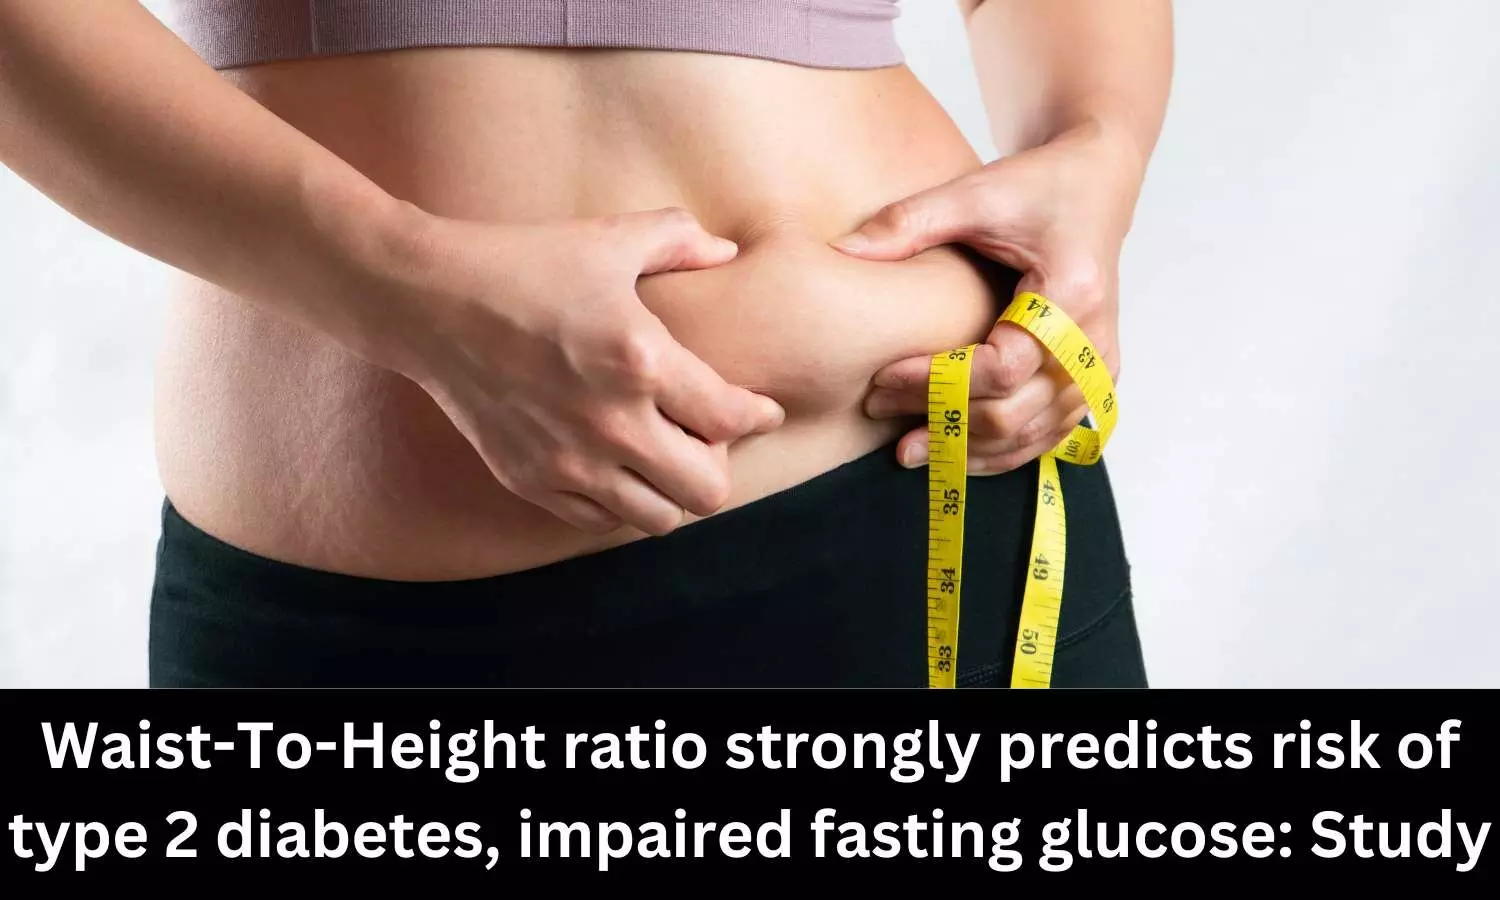 Waist-To-Height ratio independently predicts risk of type 2 diabetes, impaired fasting glucose: Study